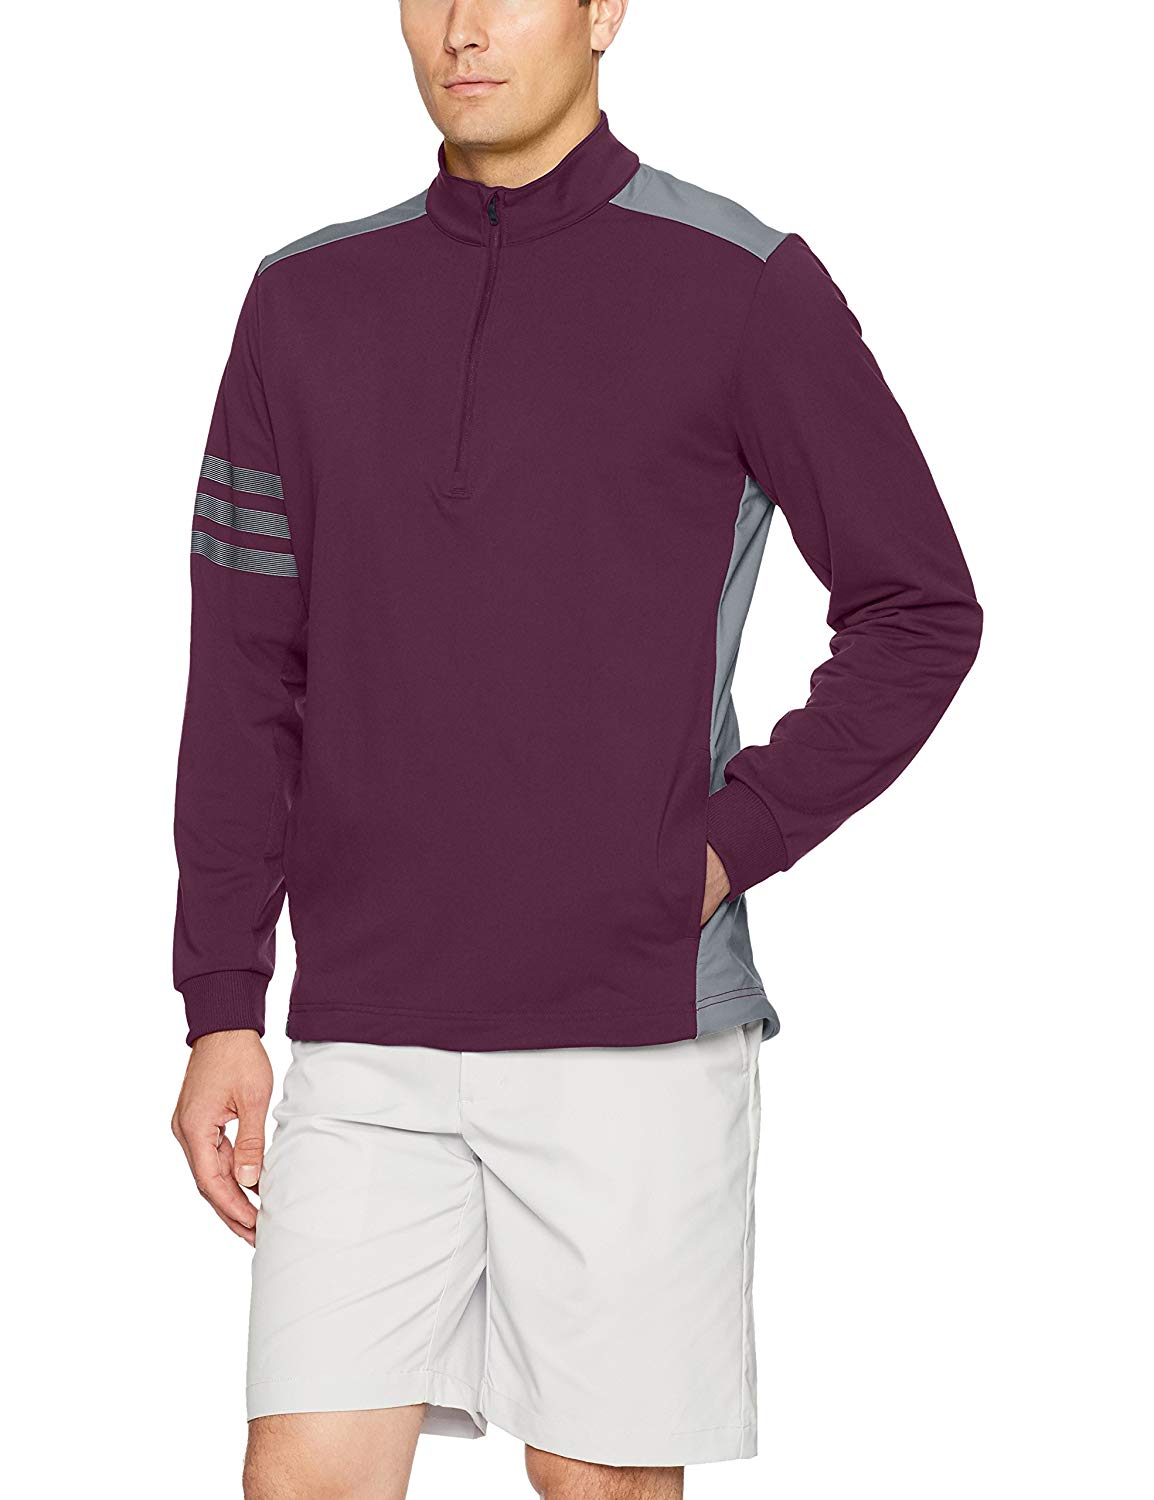 Mens Adidas Competition 3 Stripe Quarter Zip Golf Pullovers